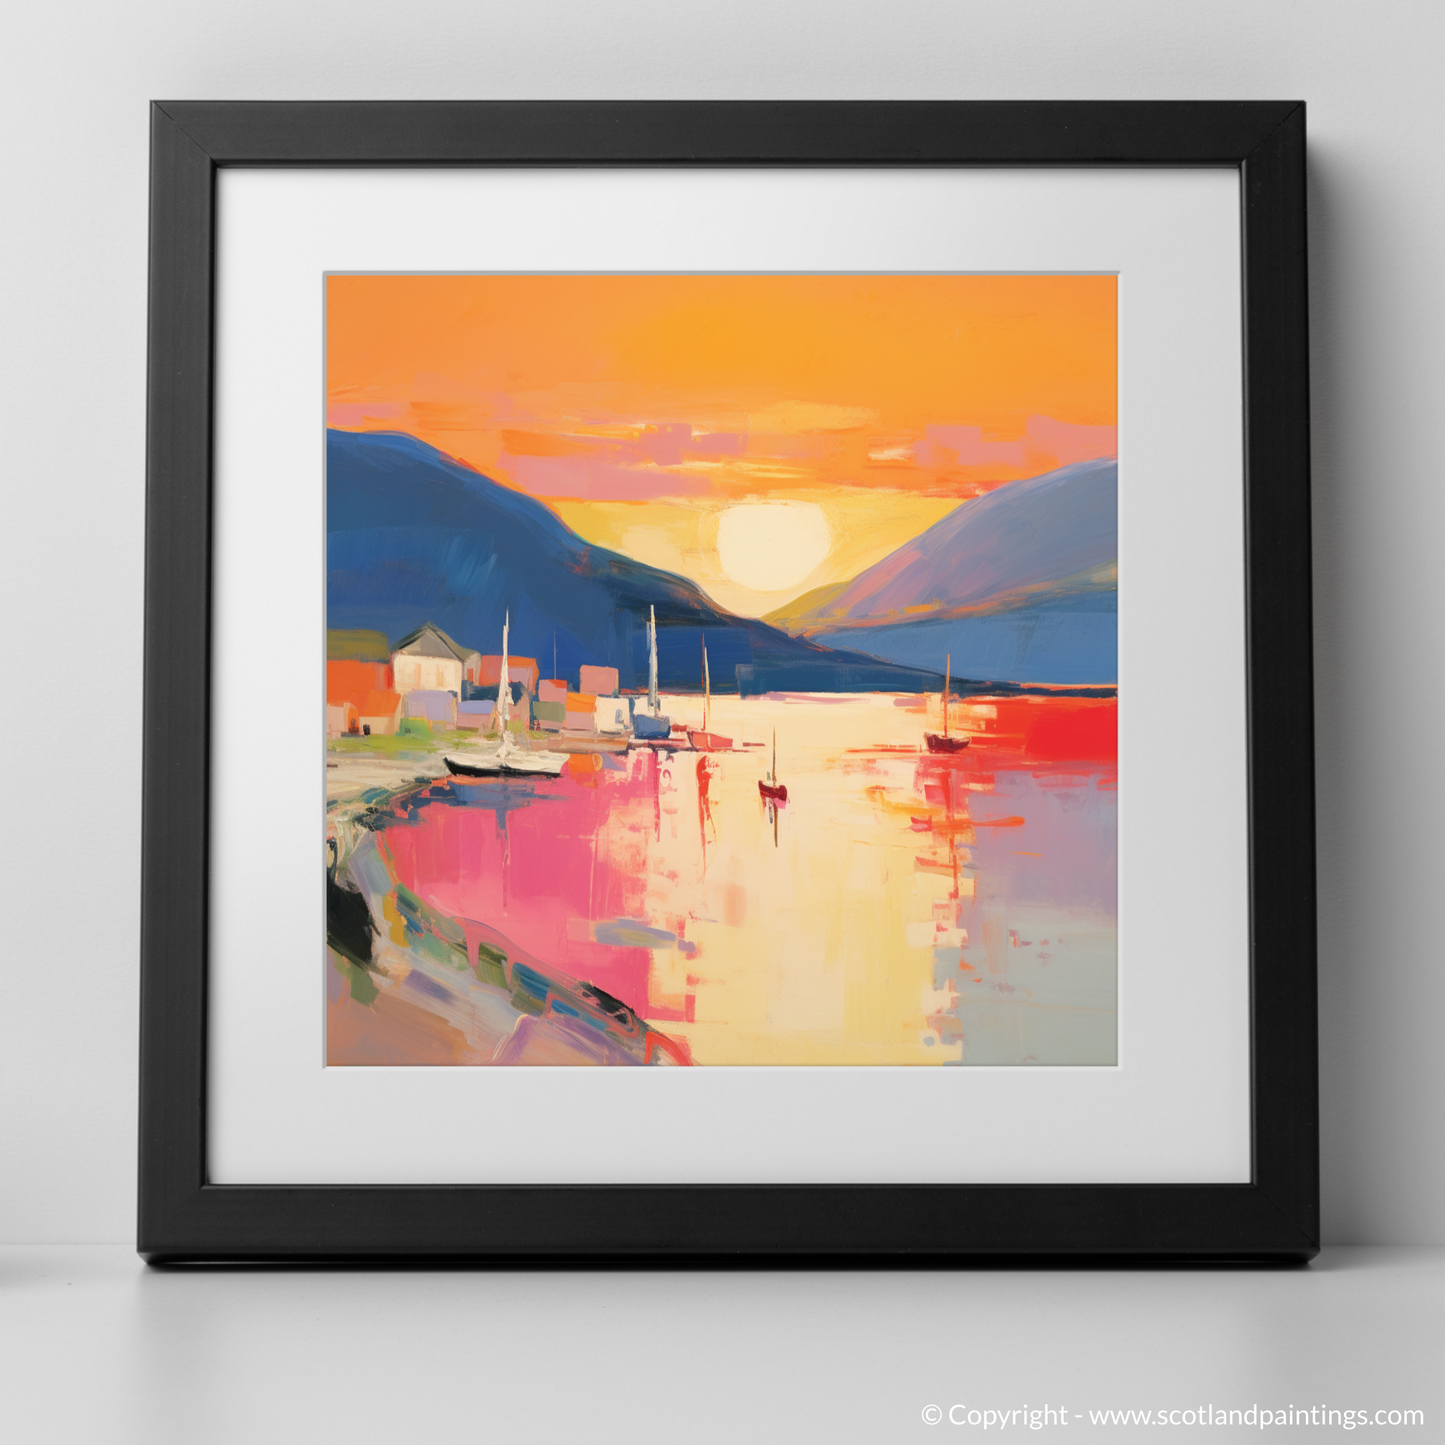 Golden Hour Embrace: An Abstract Ode to Ullapool Harbour